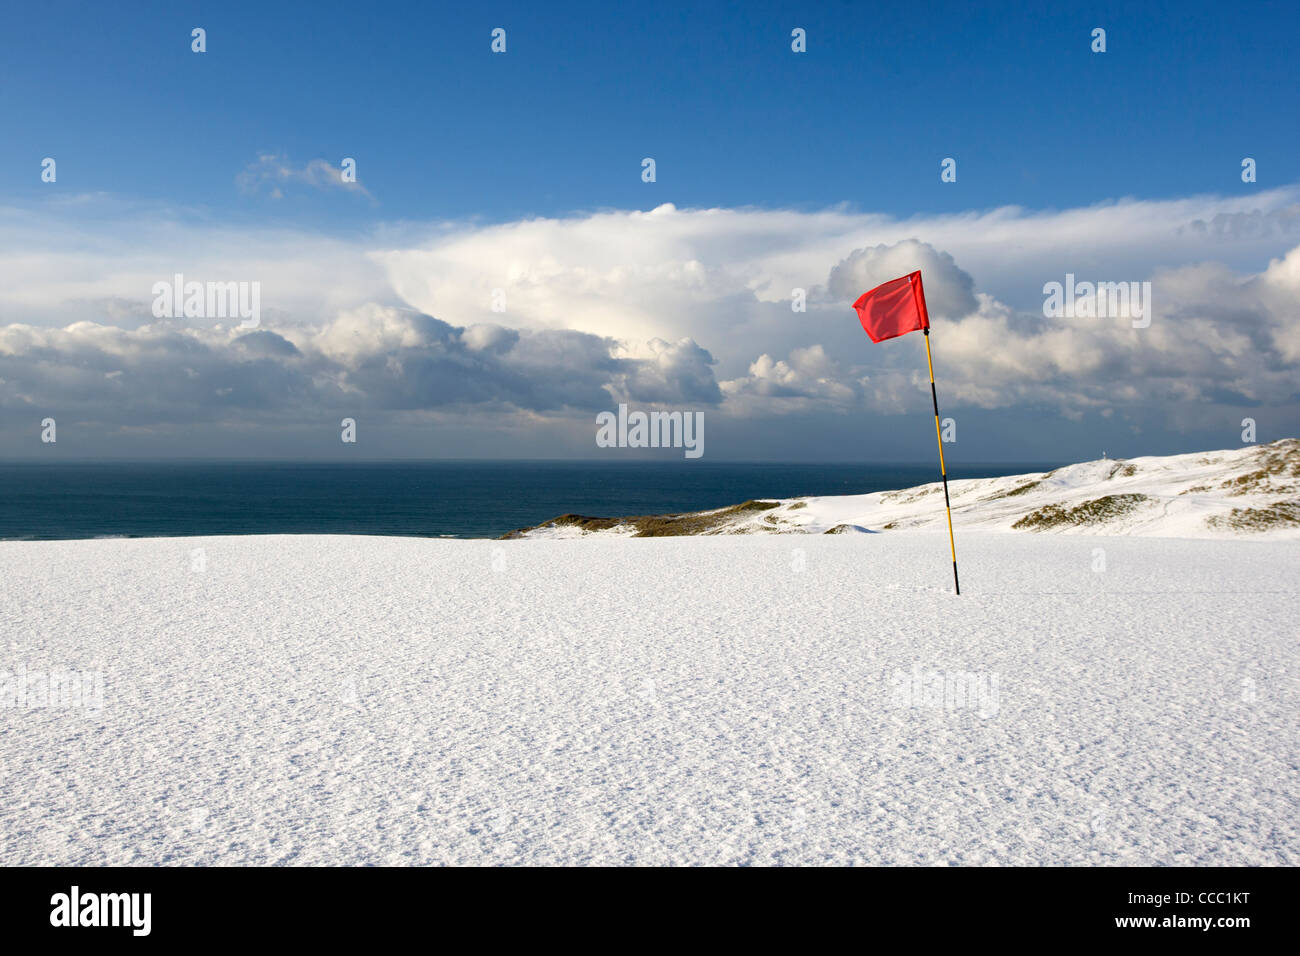 A red flag stands in the snow on one of the greens at the golf course at Perranporth Cornwall. Stock Photo